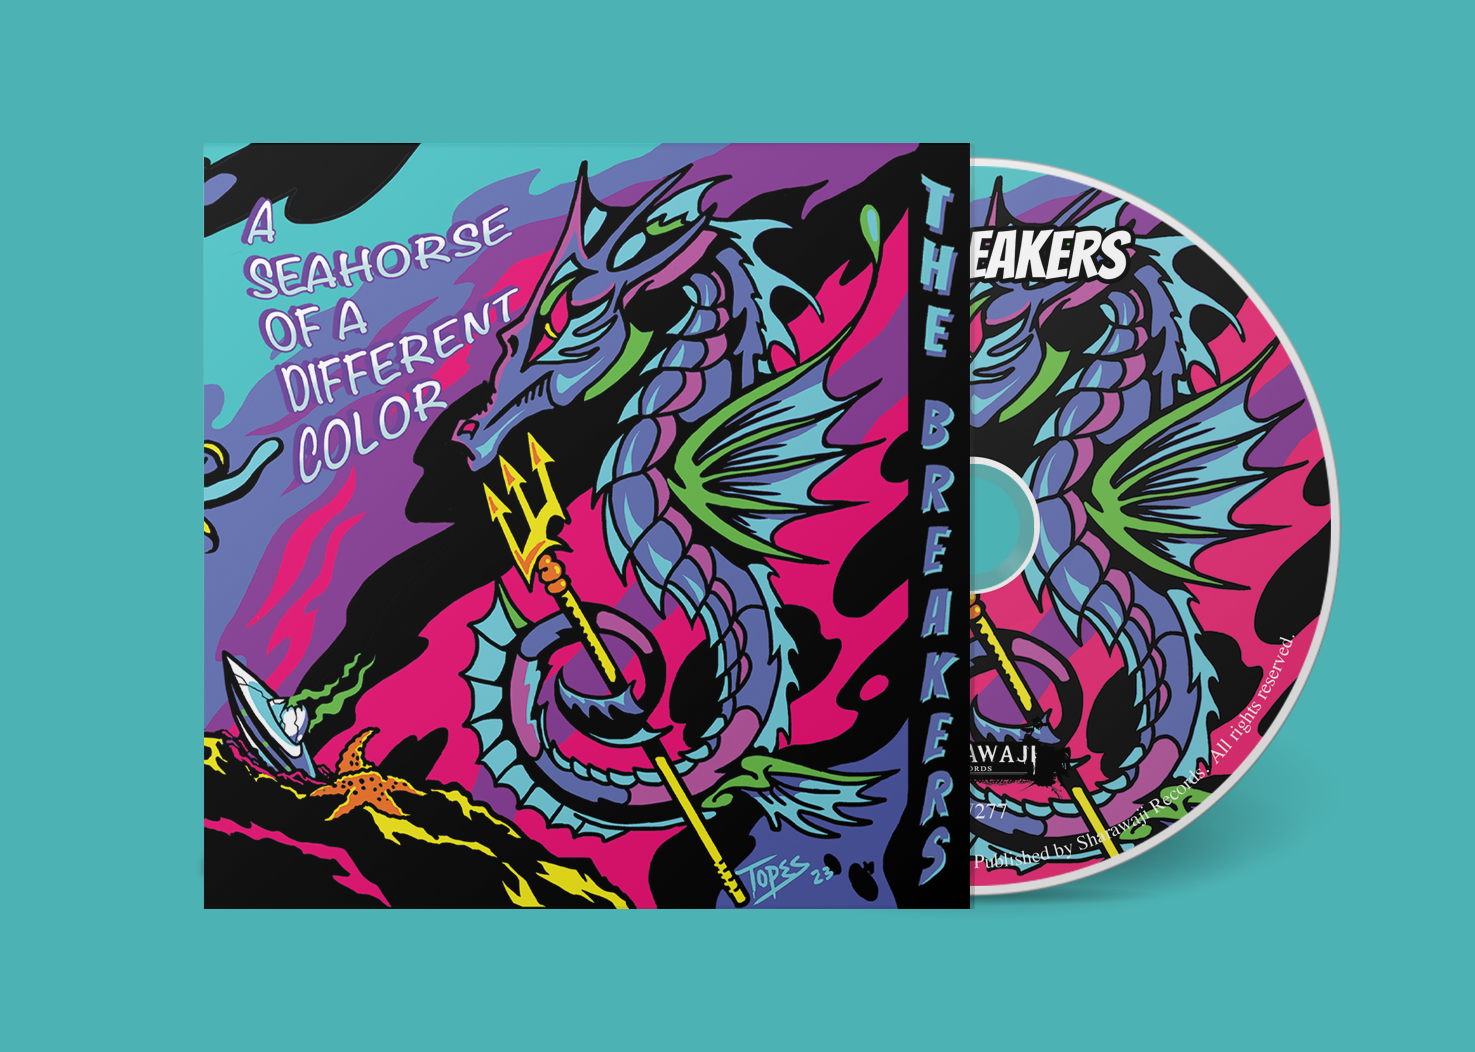 SRW277aa_bandcamp_CD_template The Breakers - A Seahorse Of A Different Color (Jacket CD) - SHARAWAJI.COM